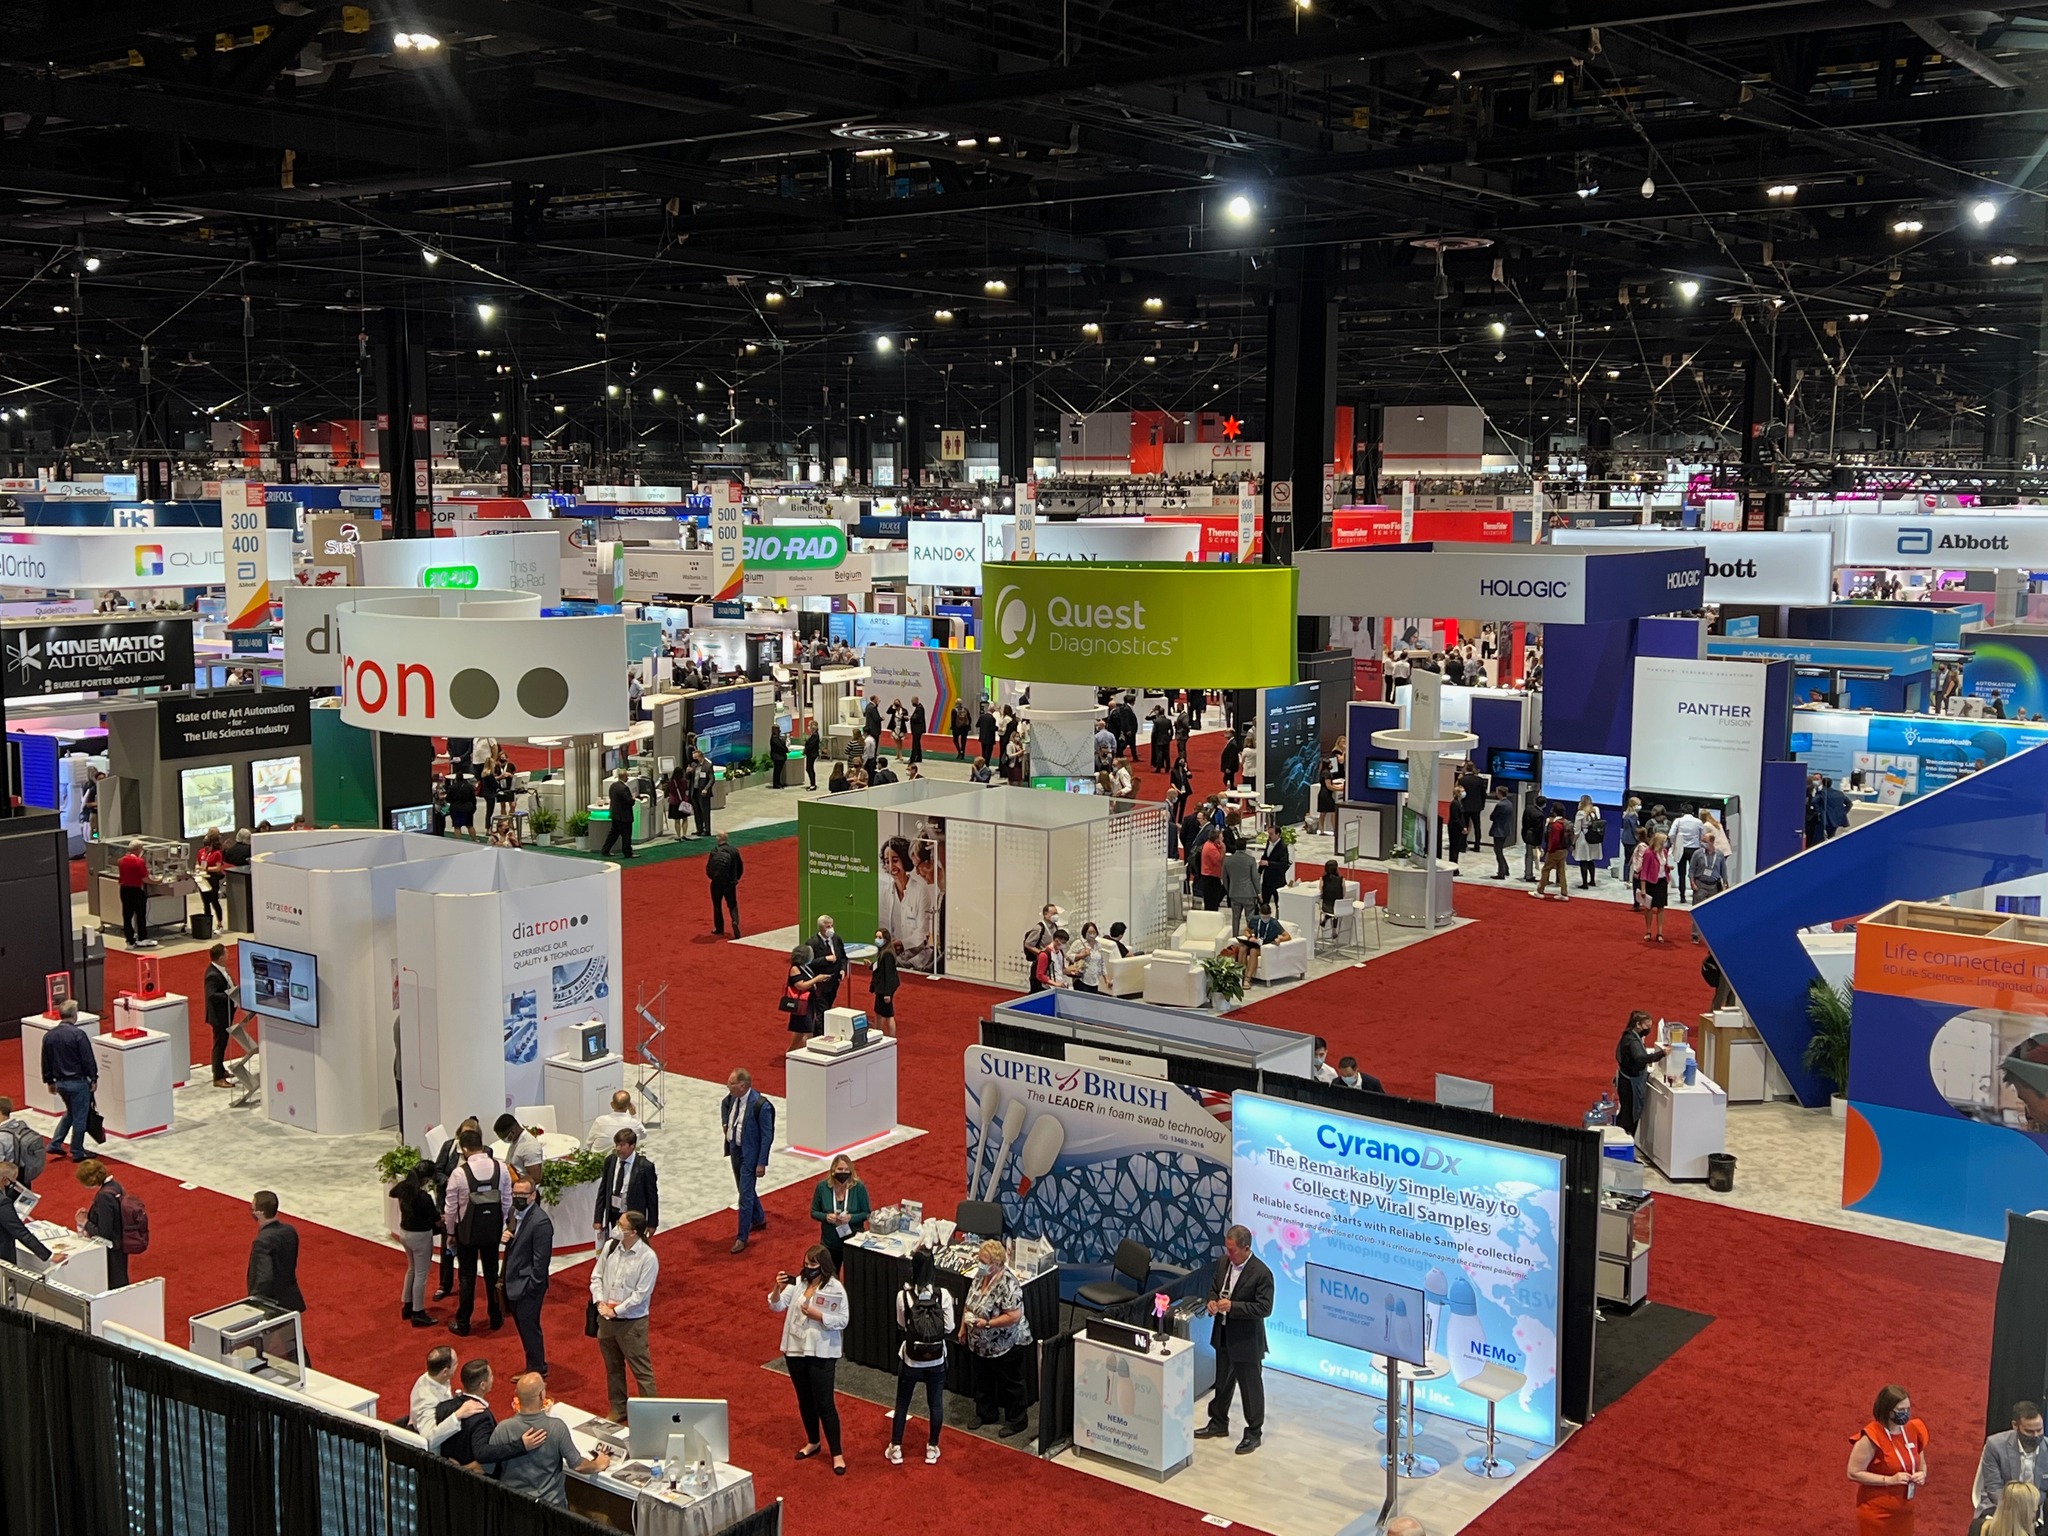 Image: The premier global laboratory medicine exposition featured over 900 exhibitors and more than 200 new products and services (Photo courtesy of AACC)